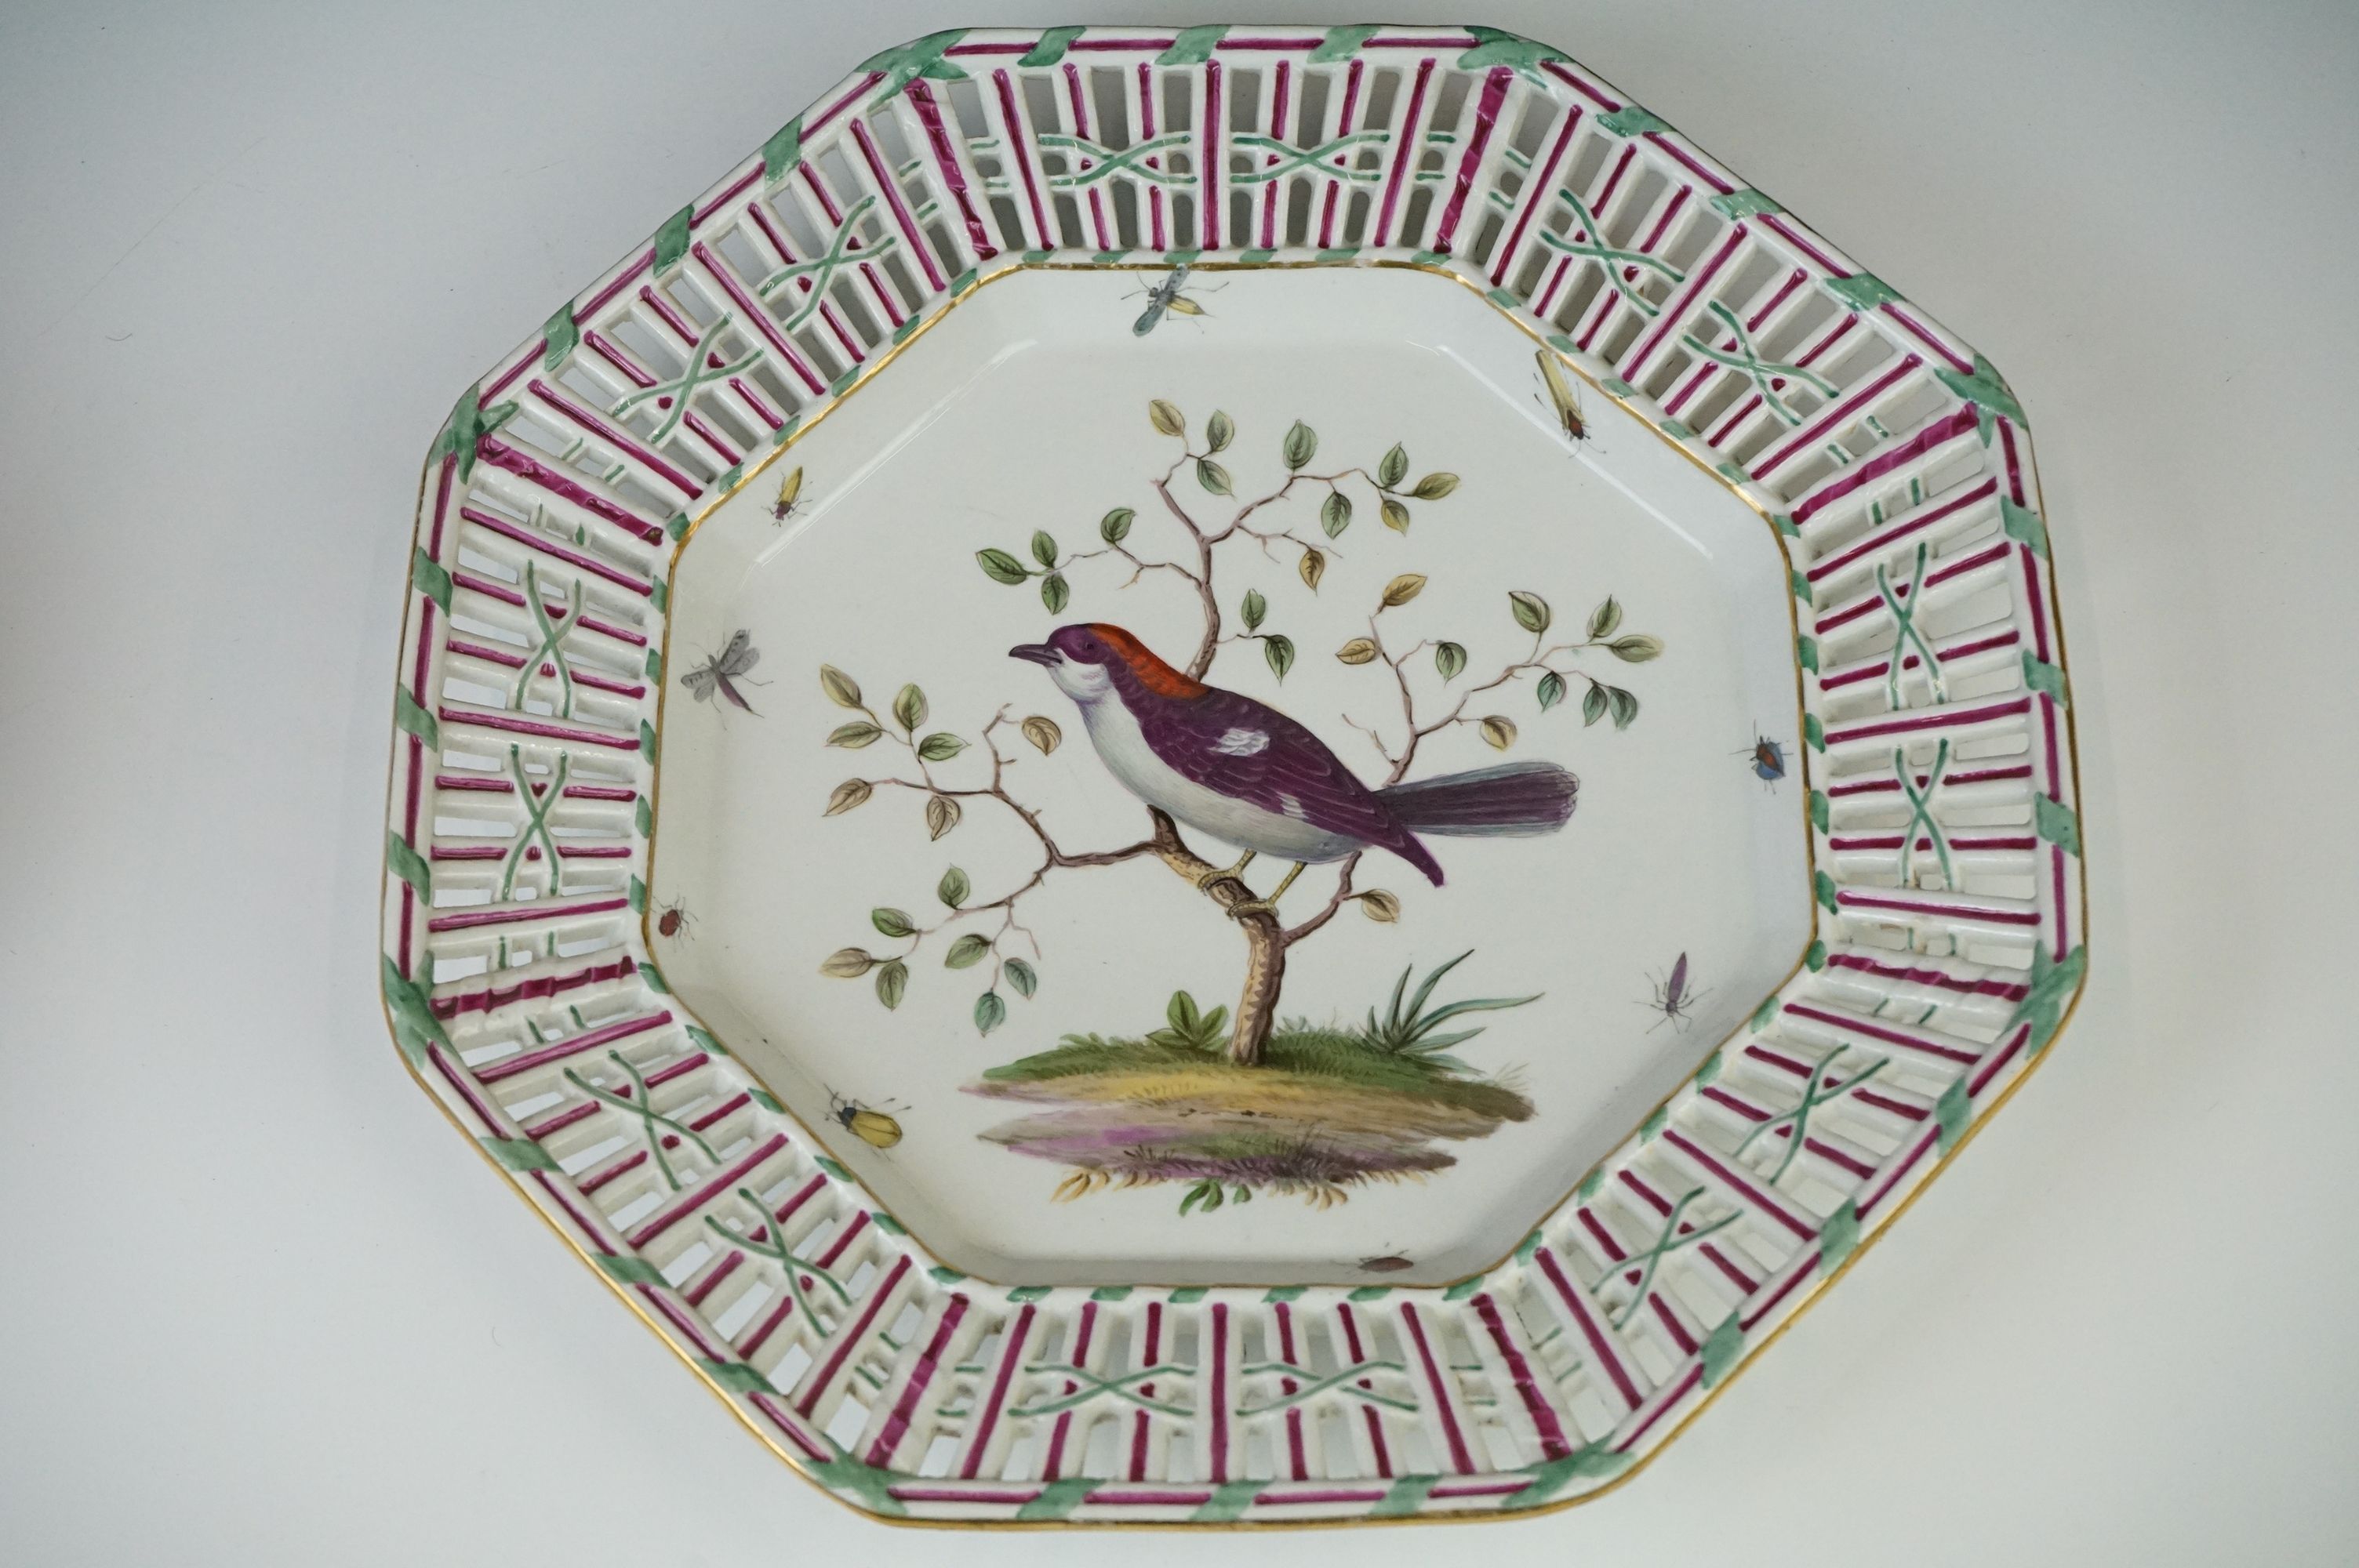 19th Century Meissen octagonal plate with pierced border and decorated with birds and insects, - Image 4 of 11